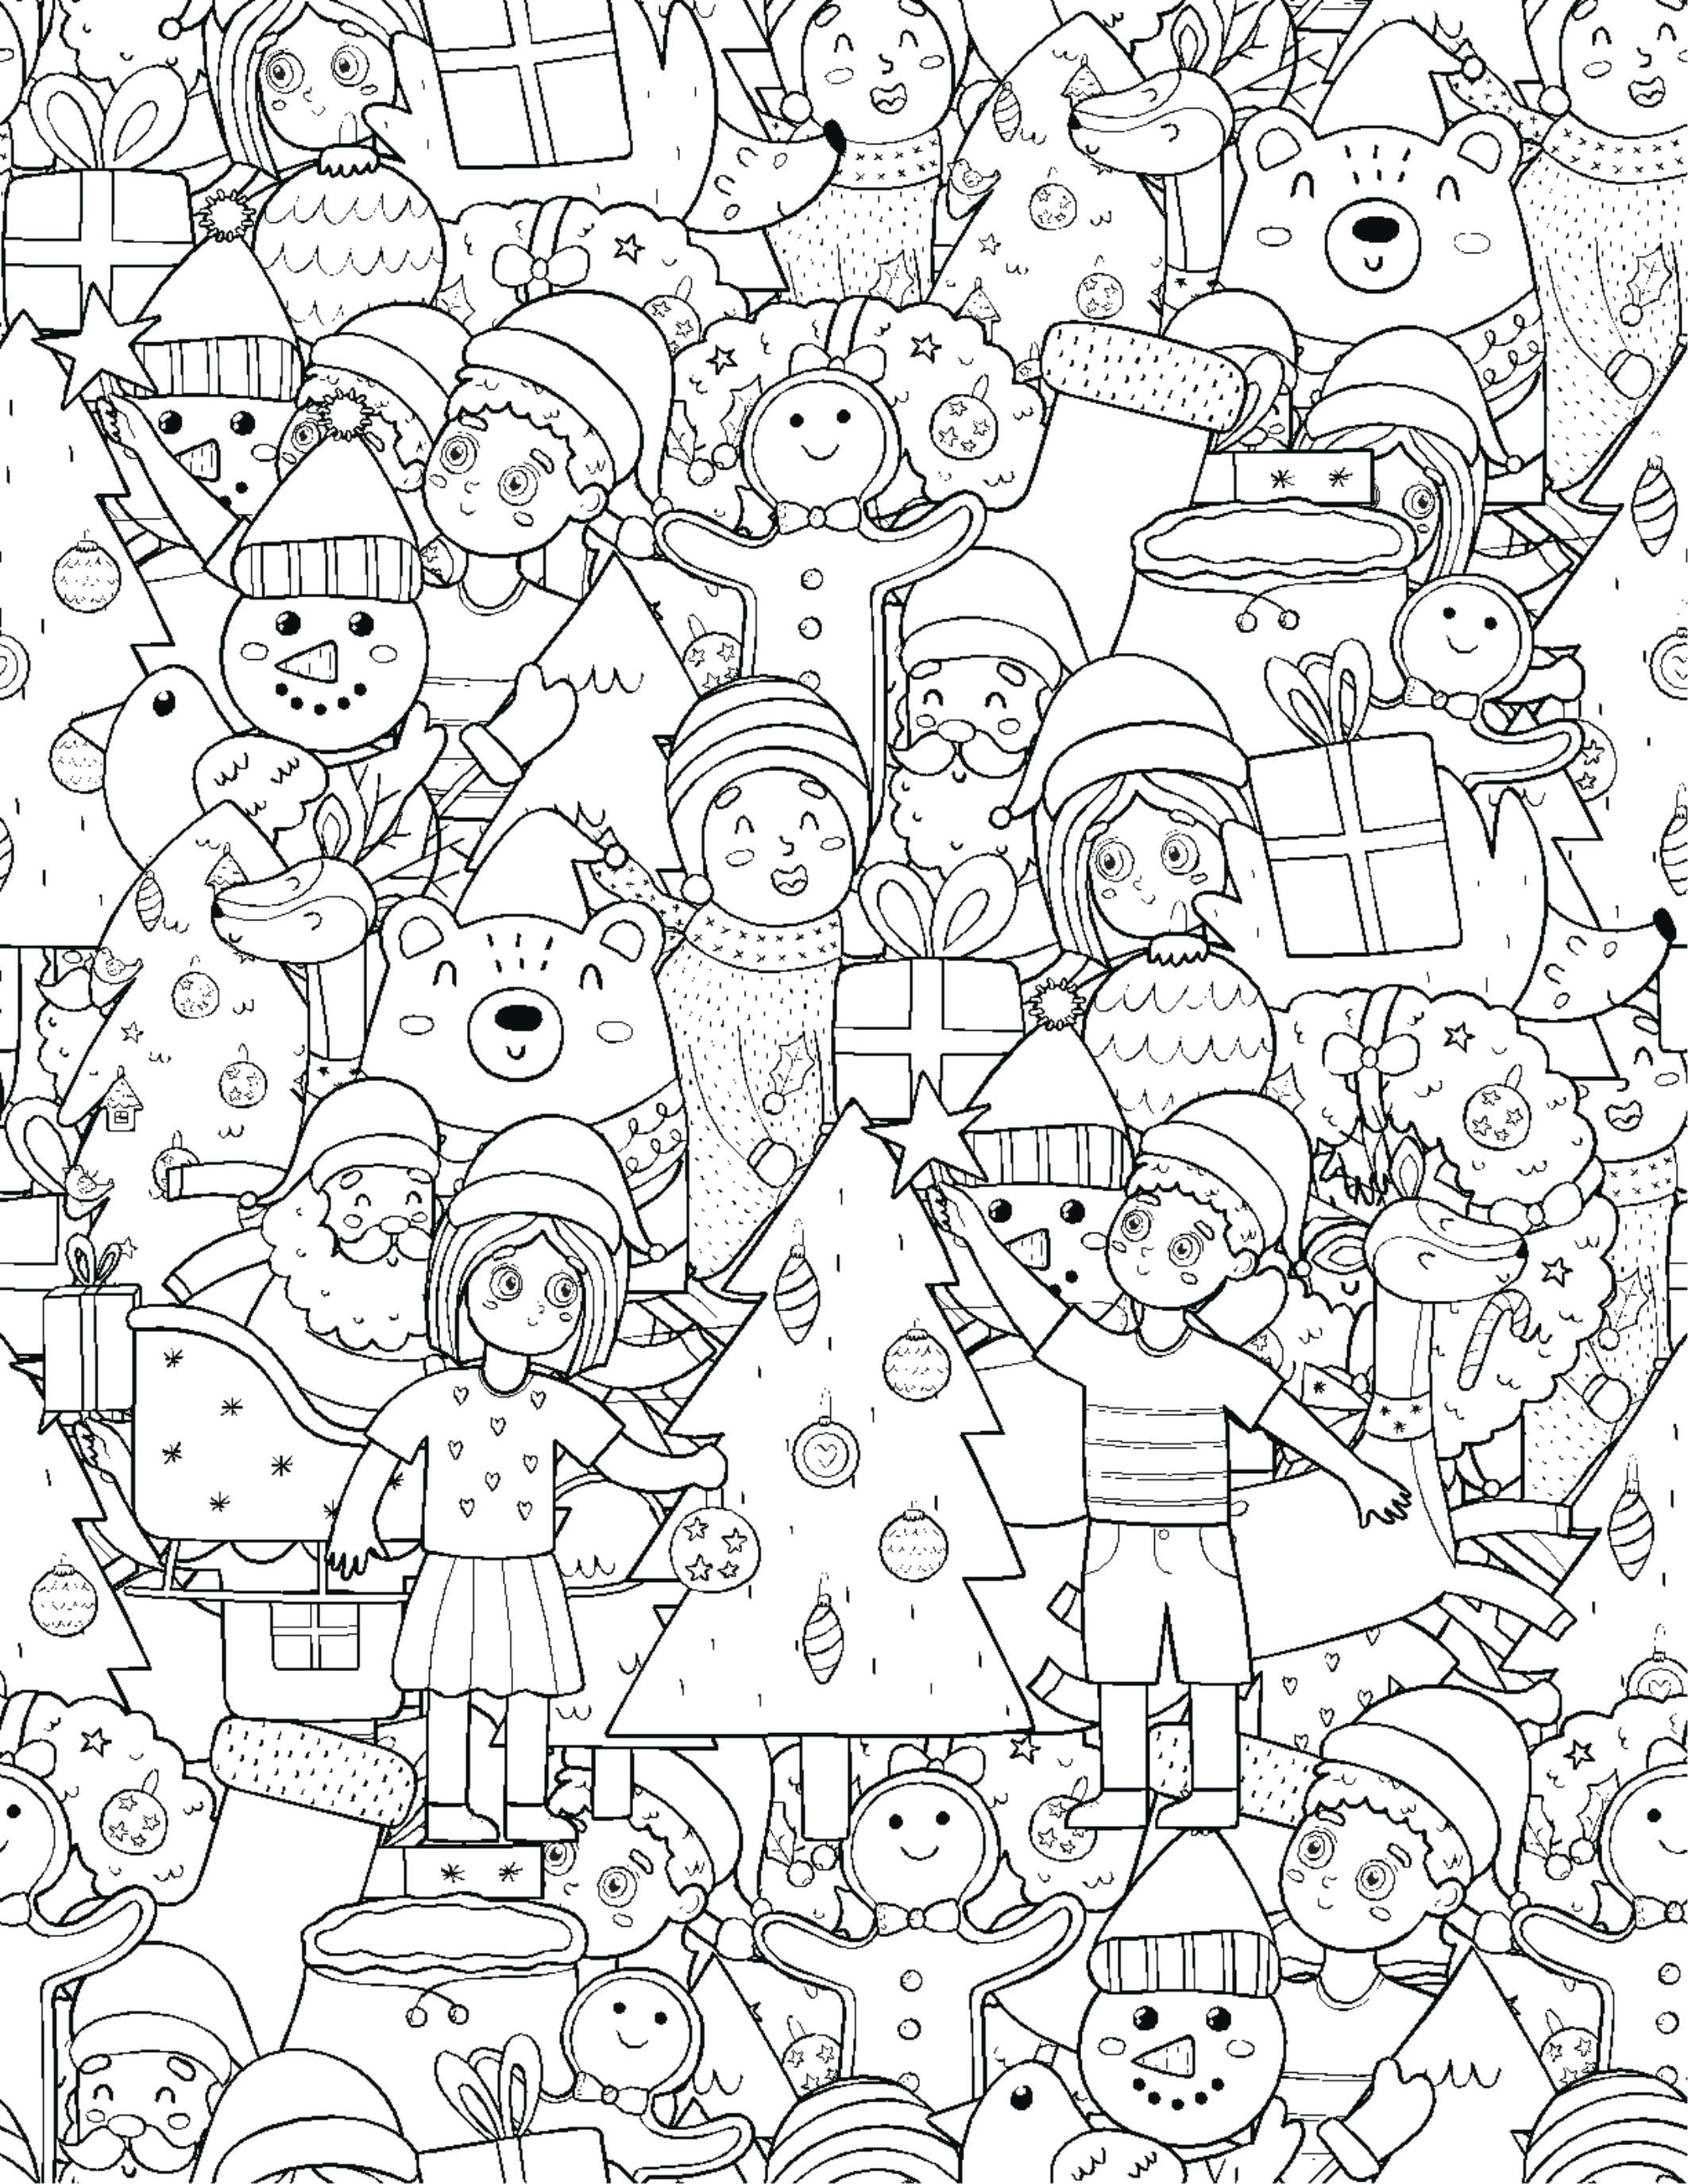 Creative Patterns - Coloring Book For Kids Ages 8-12 by GoPo Publish